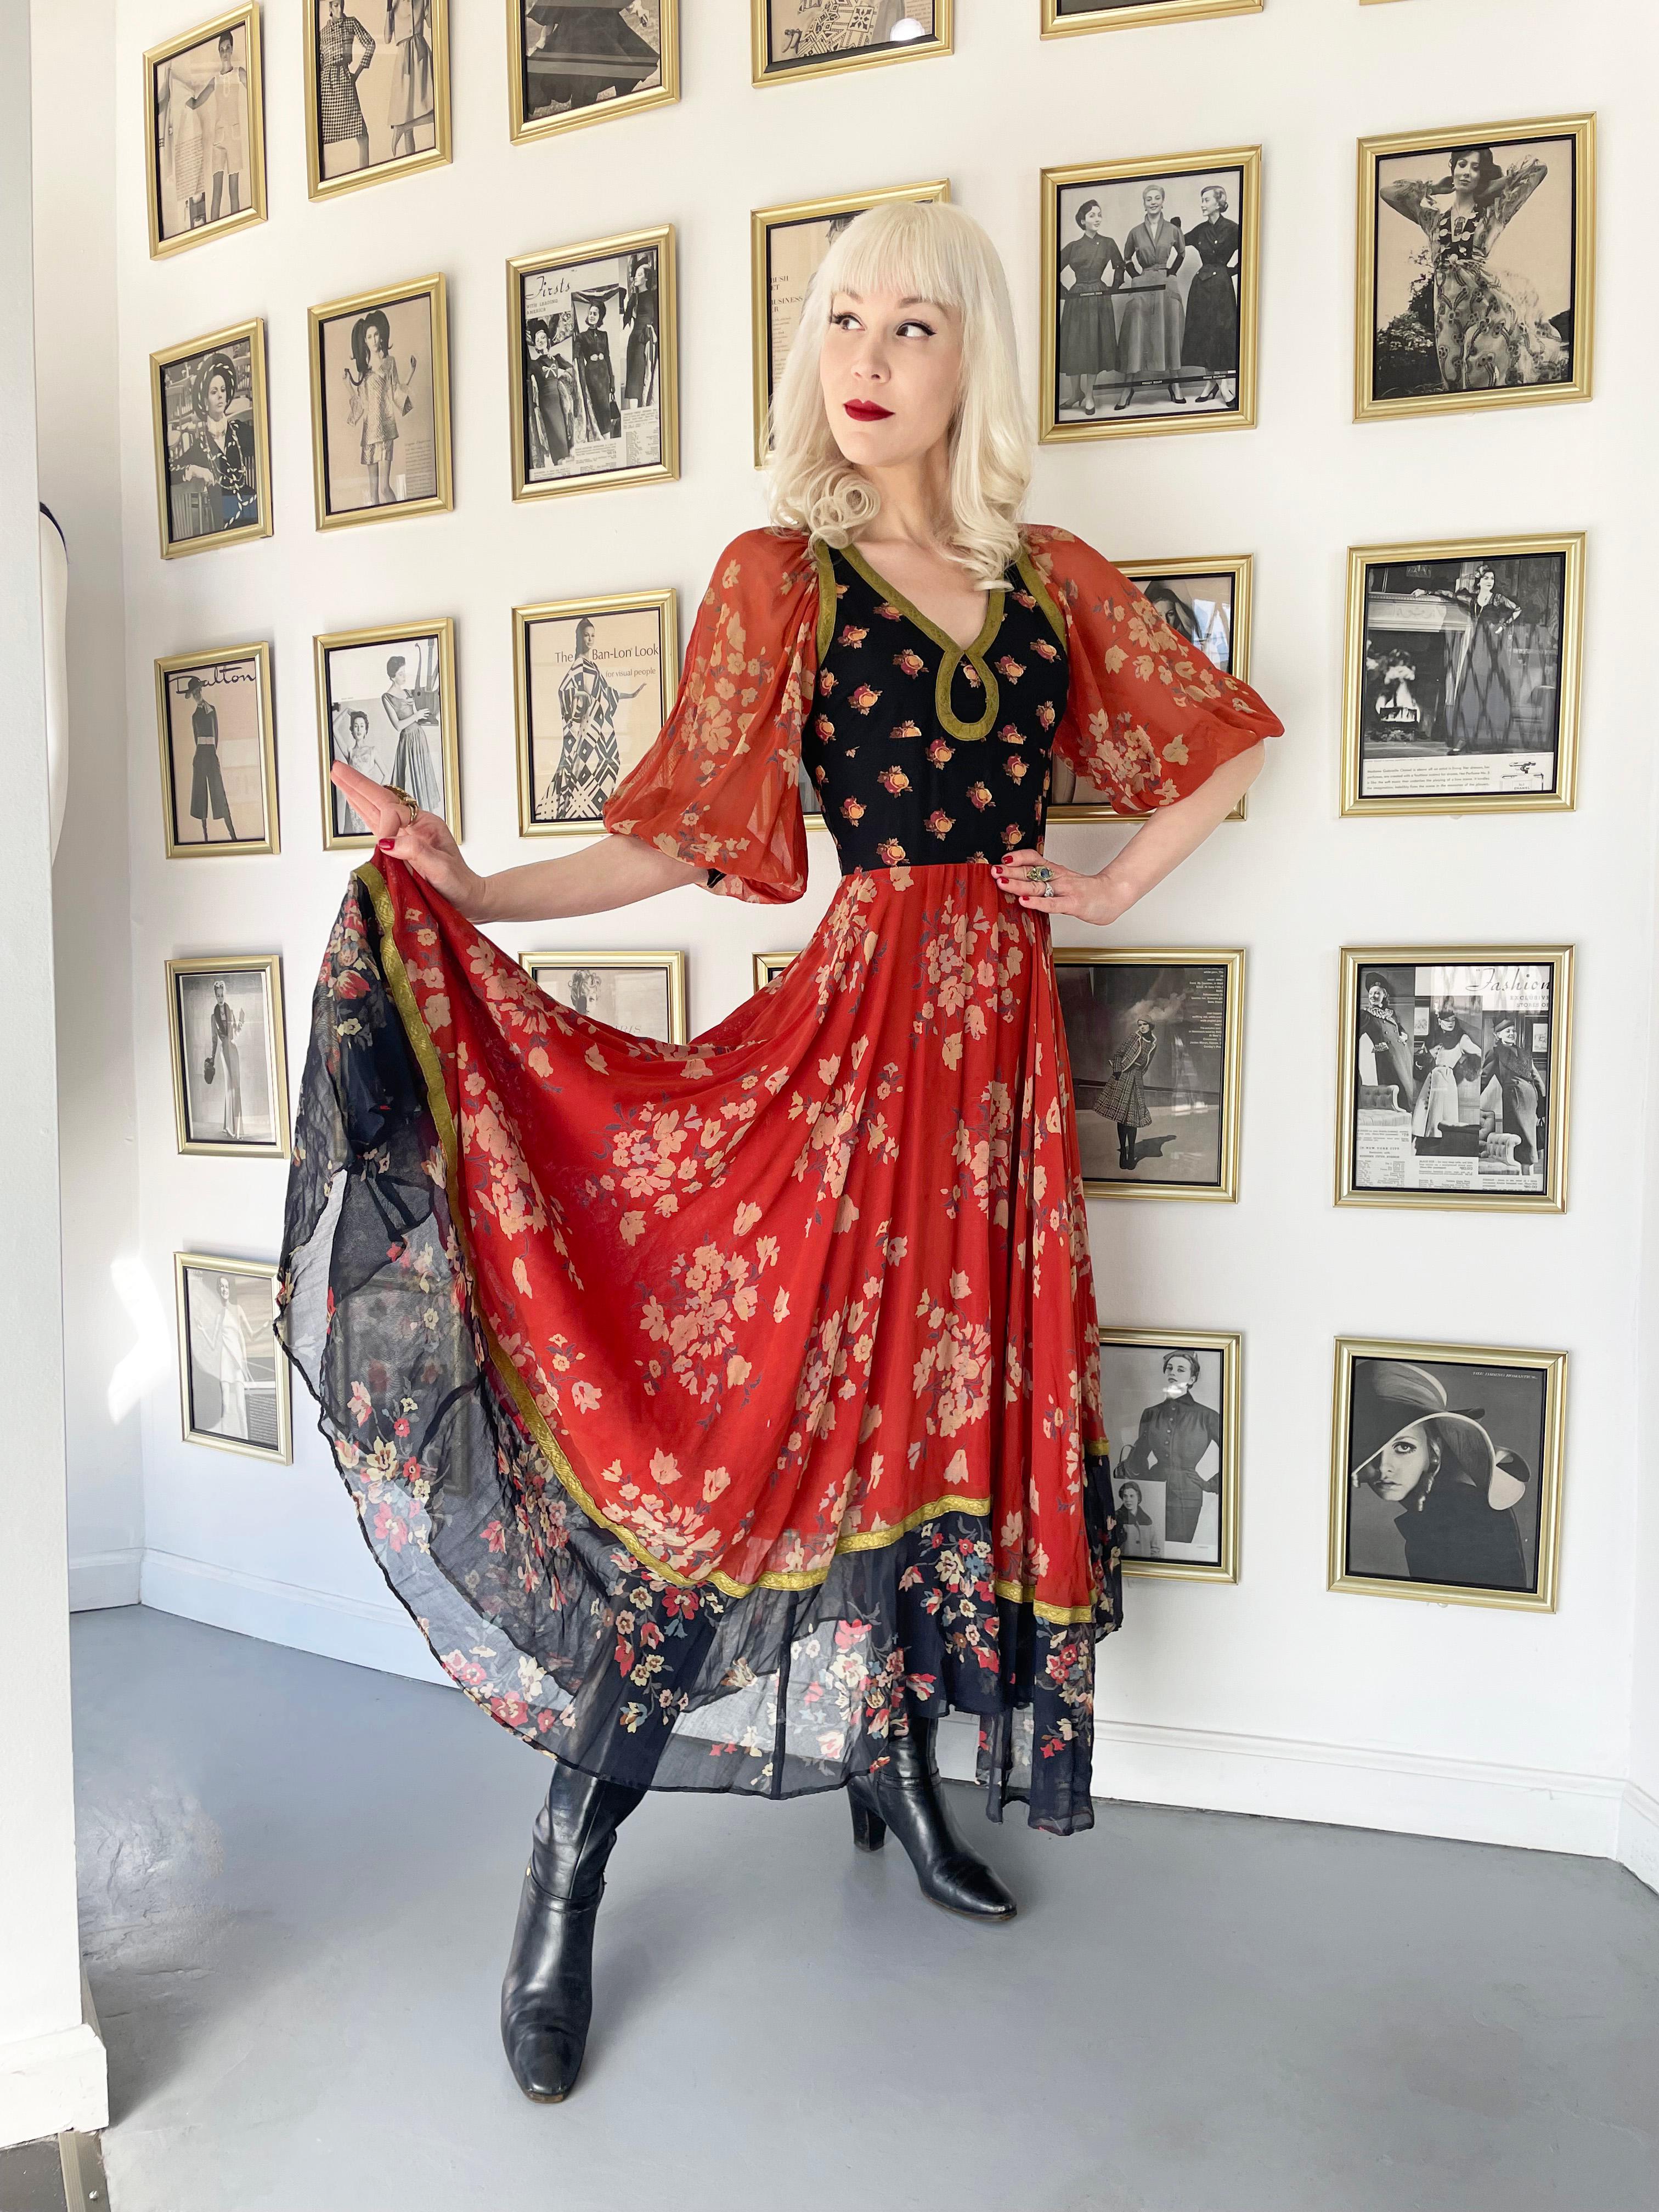 Gorgeous 1971 Thea Porter documented designer dress fashioned in a magical semi-sheer floral print black and red voile cotton. The stunning fabric is trimmed in metallic gold that has a touch of shimmer which I adore. The bodice has a closed